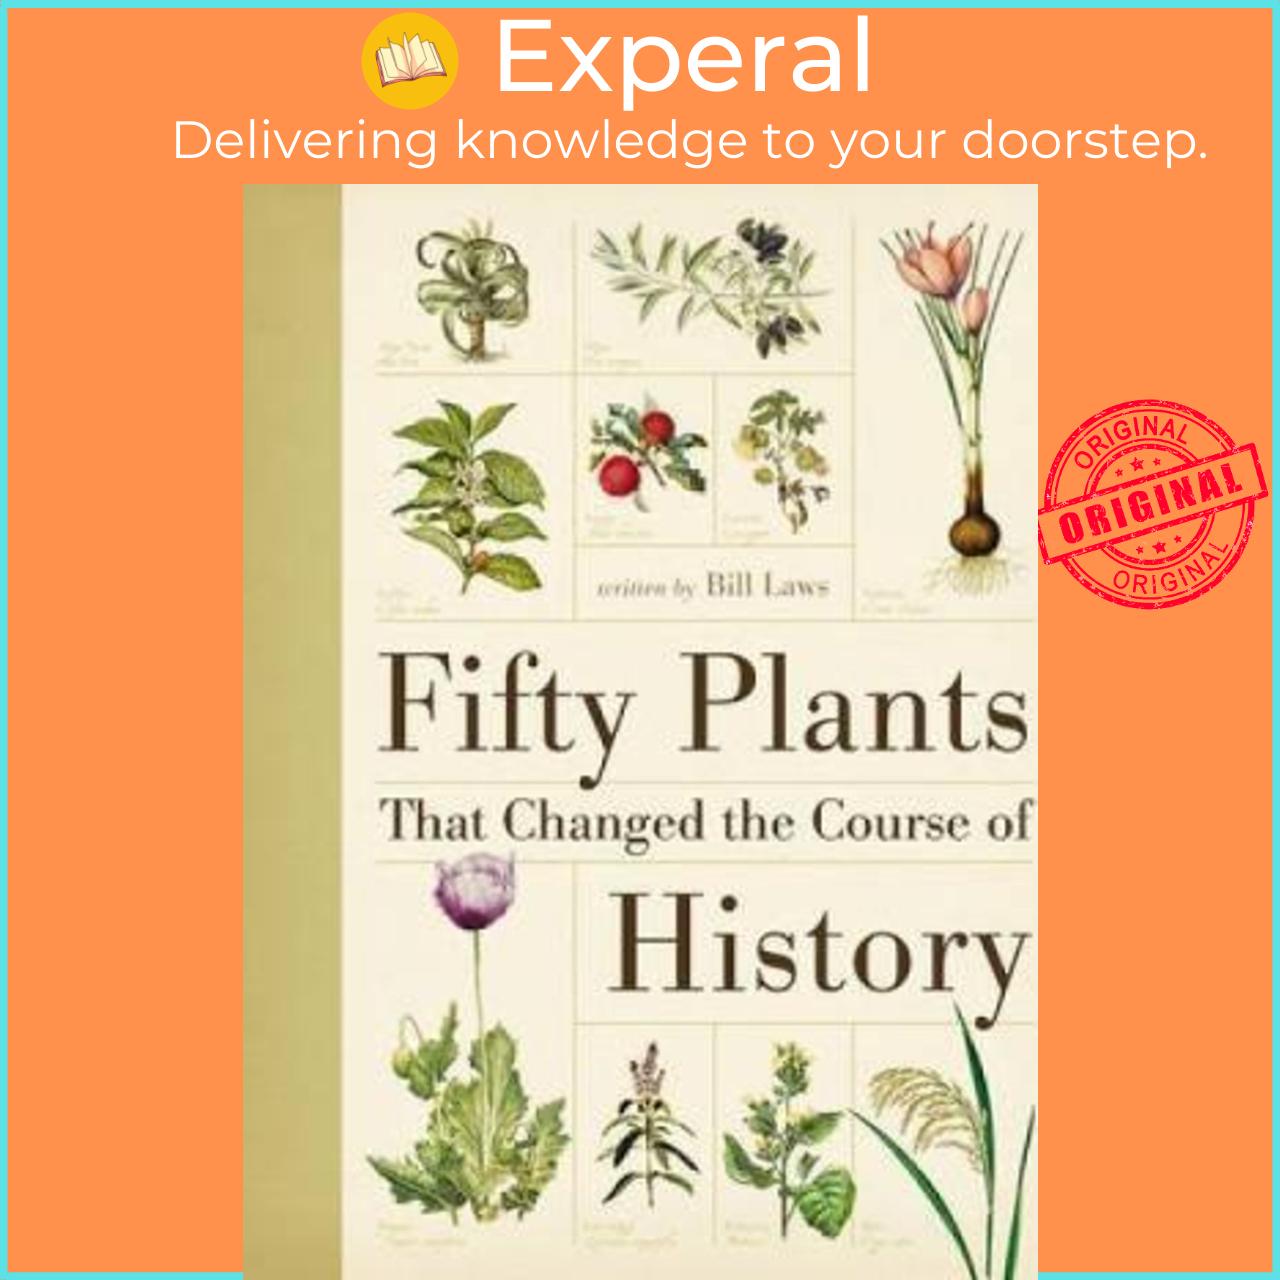 Sách - Fifty Plants That Changed the Course of History by Bill Laws (UK edition, paperback)